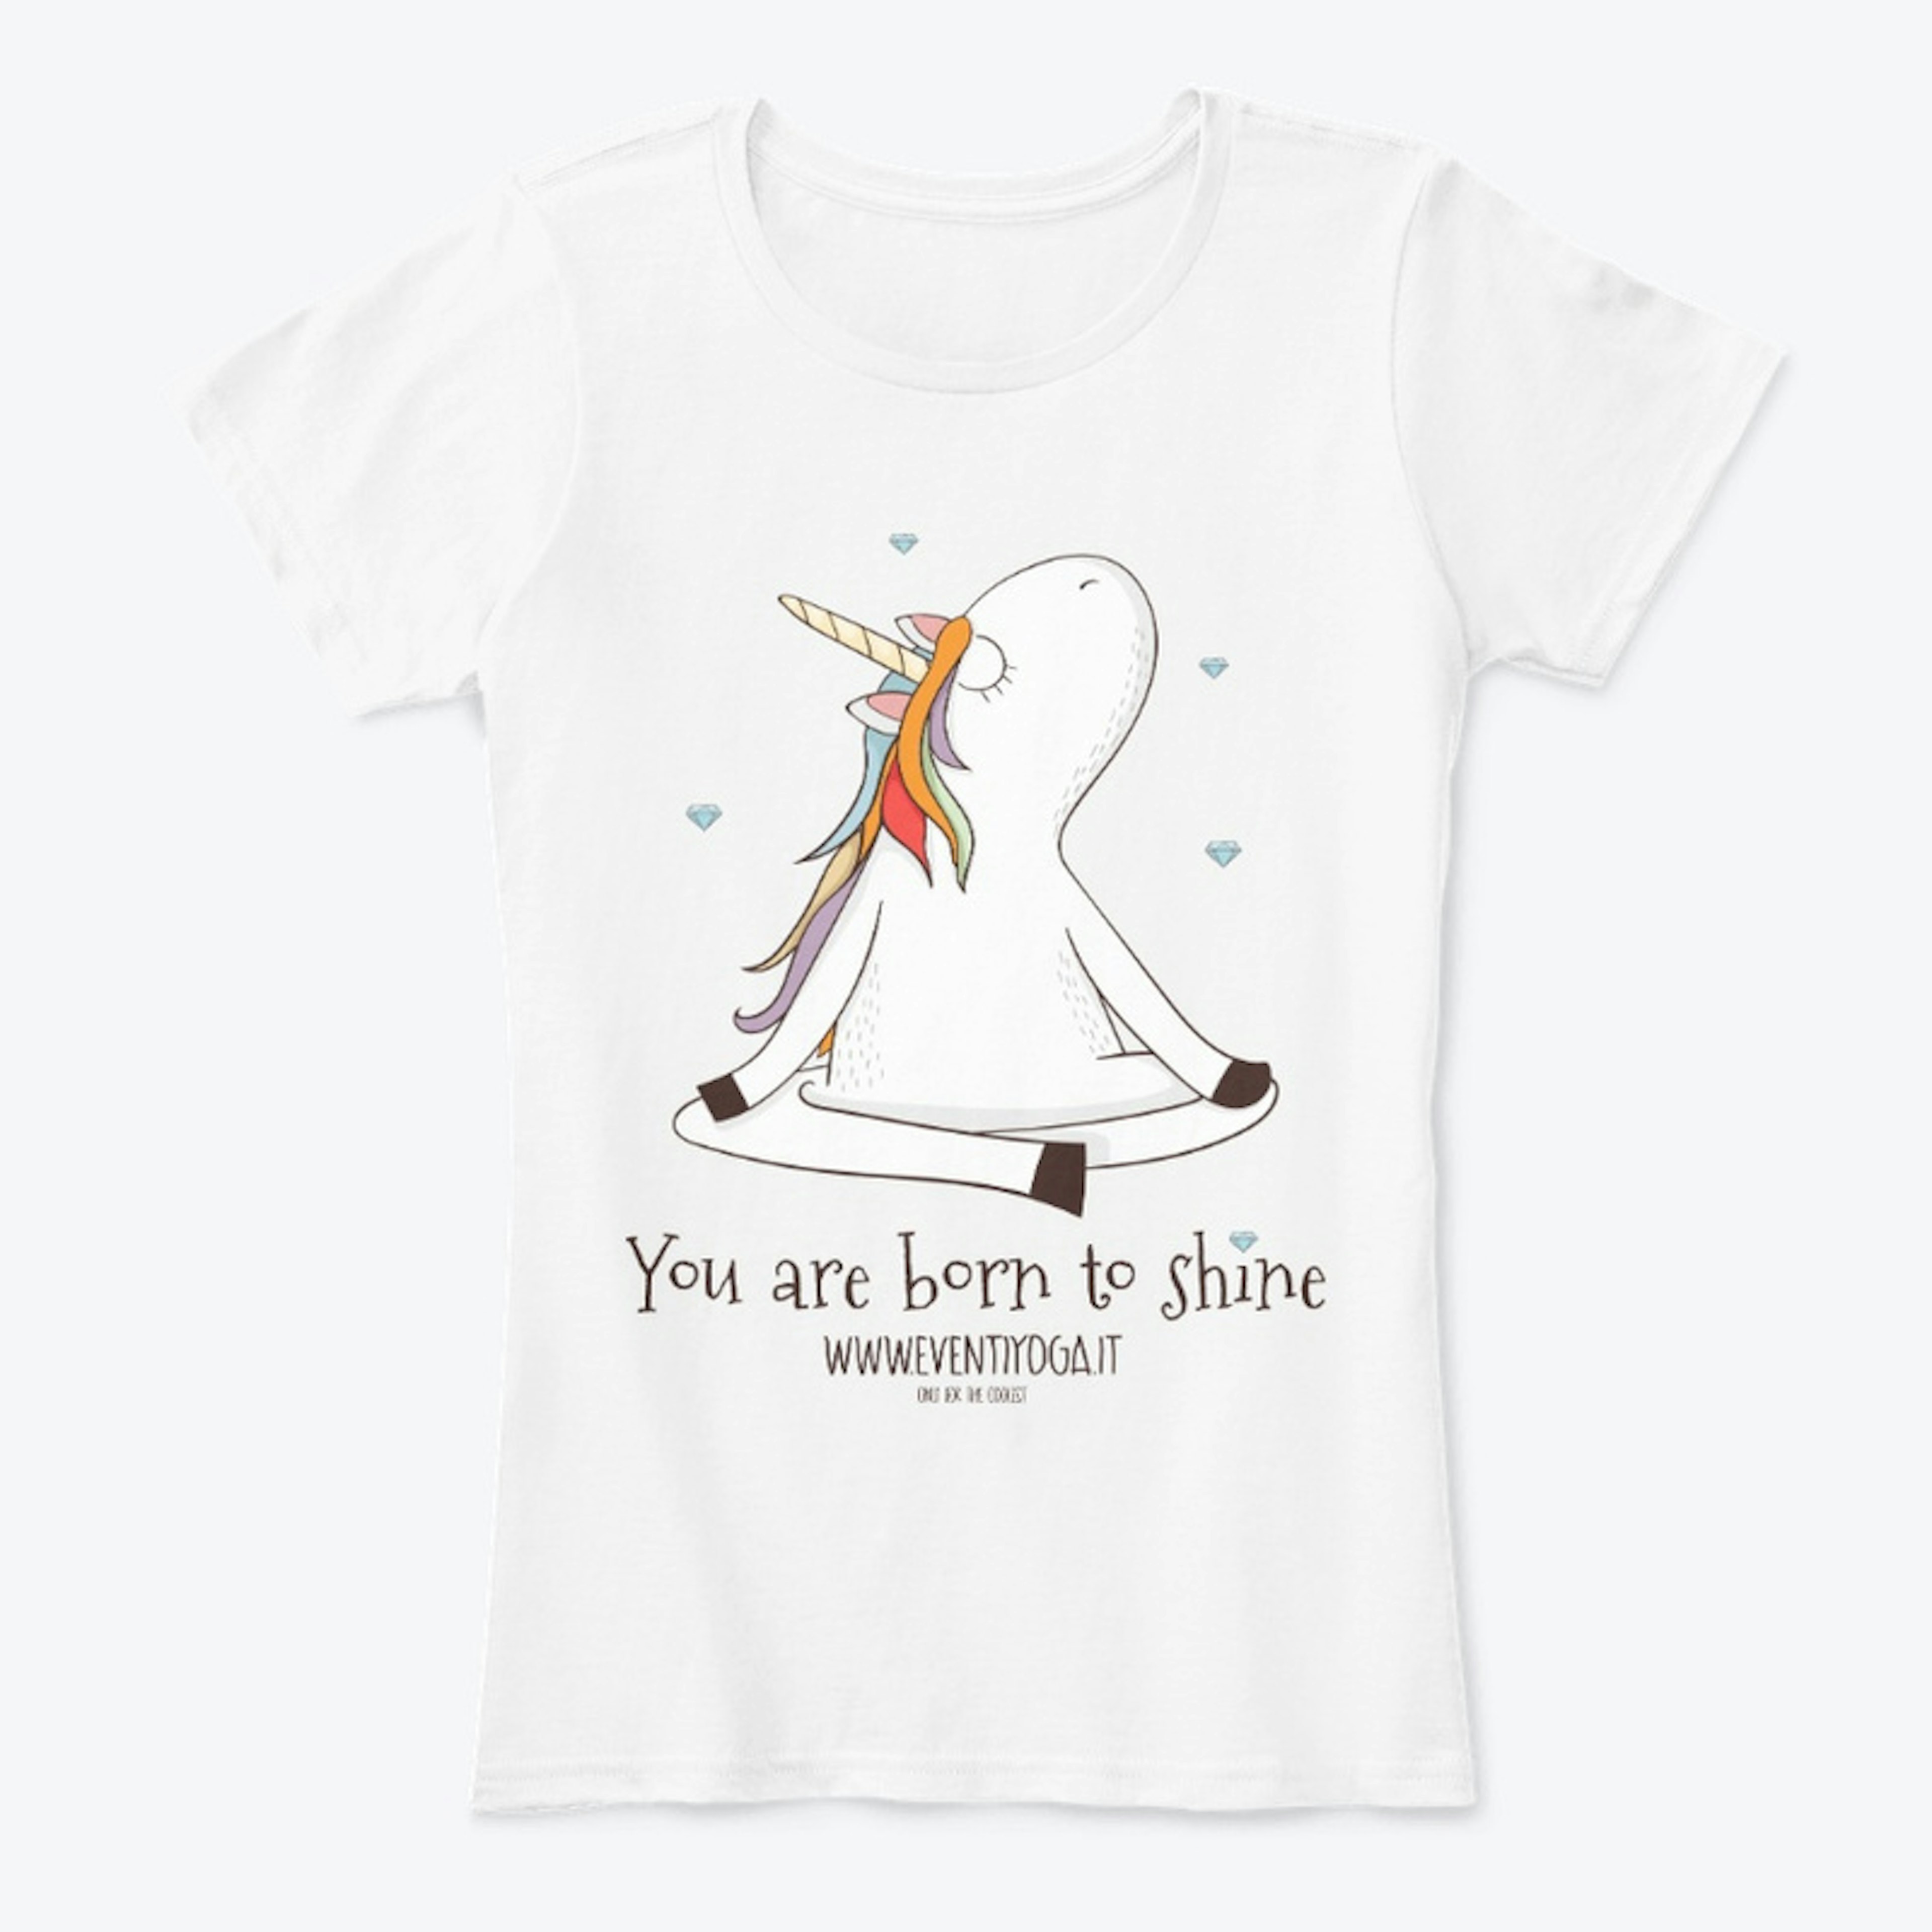 T-shirt: "YOU ARE BORN TO SHINE"